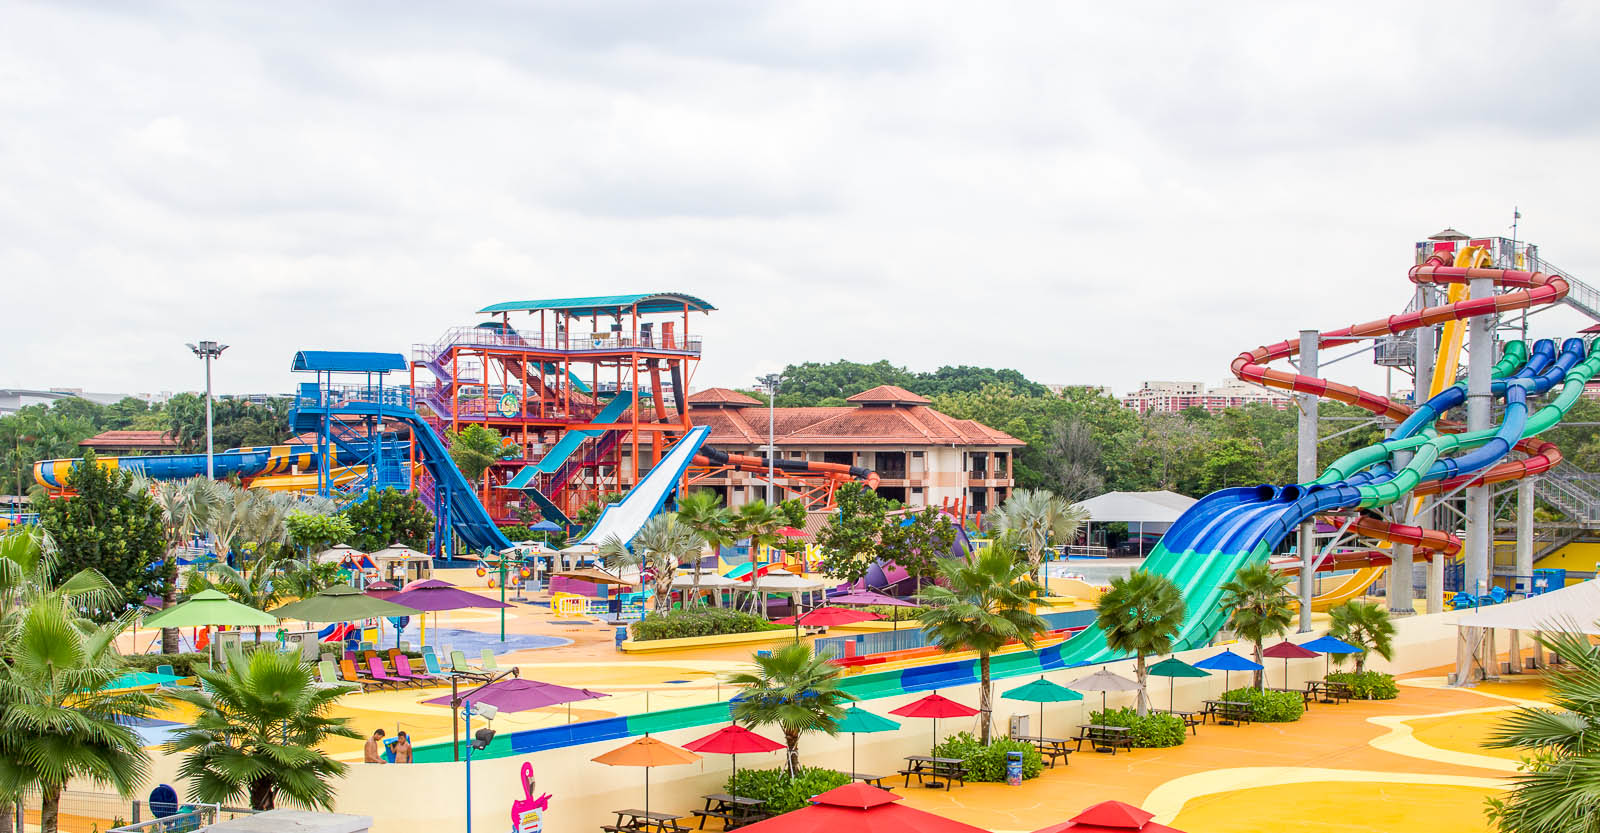 10 Things You Should Know Before Visiting Wild Wild Wet Waterpark Singapore